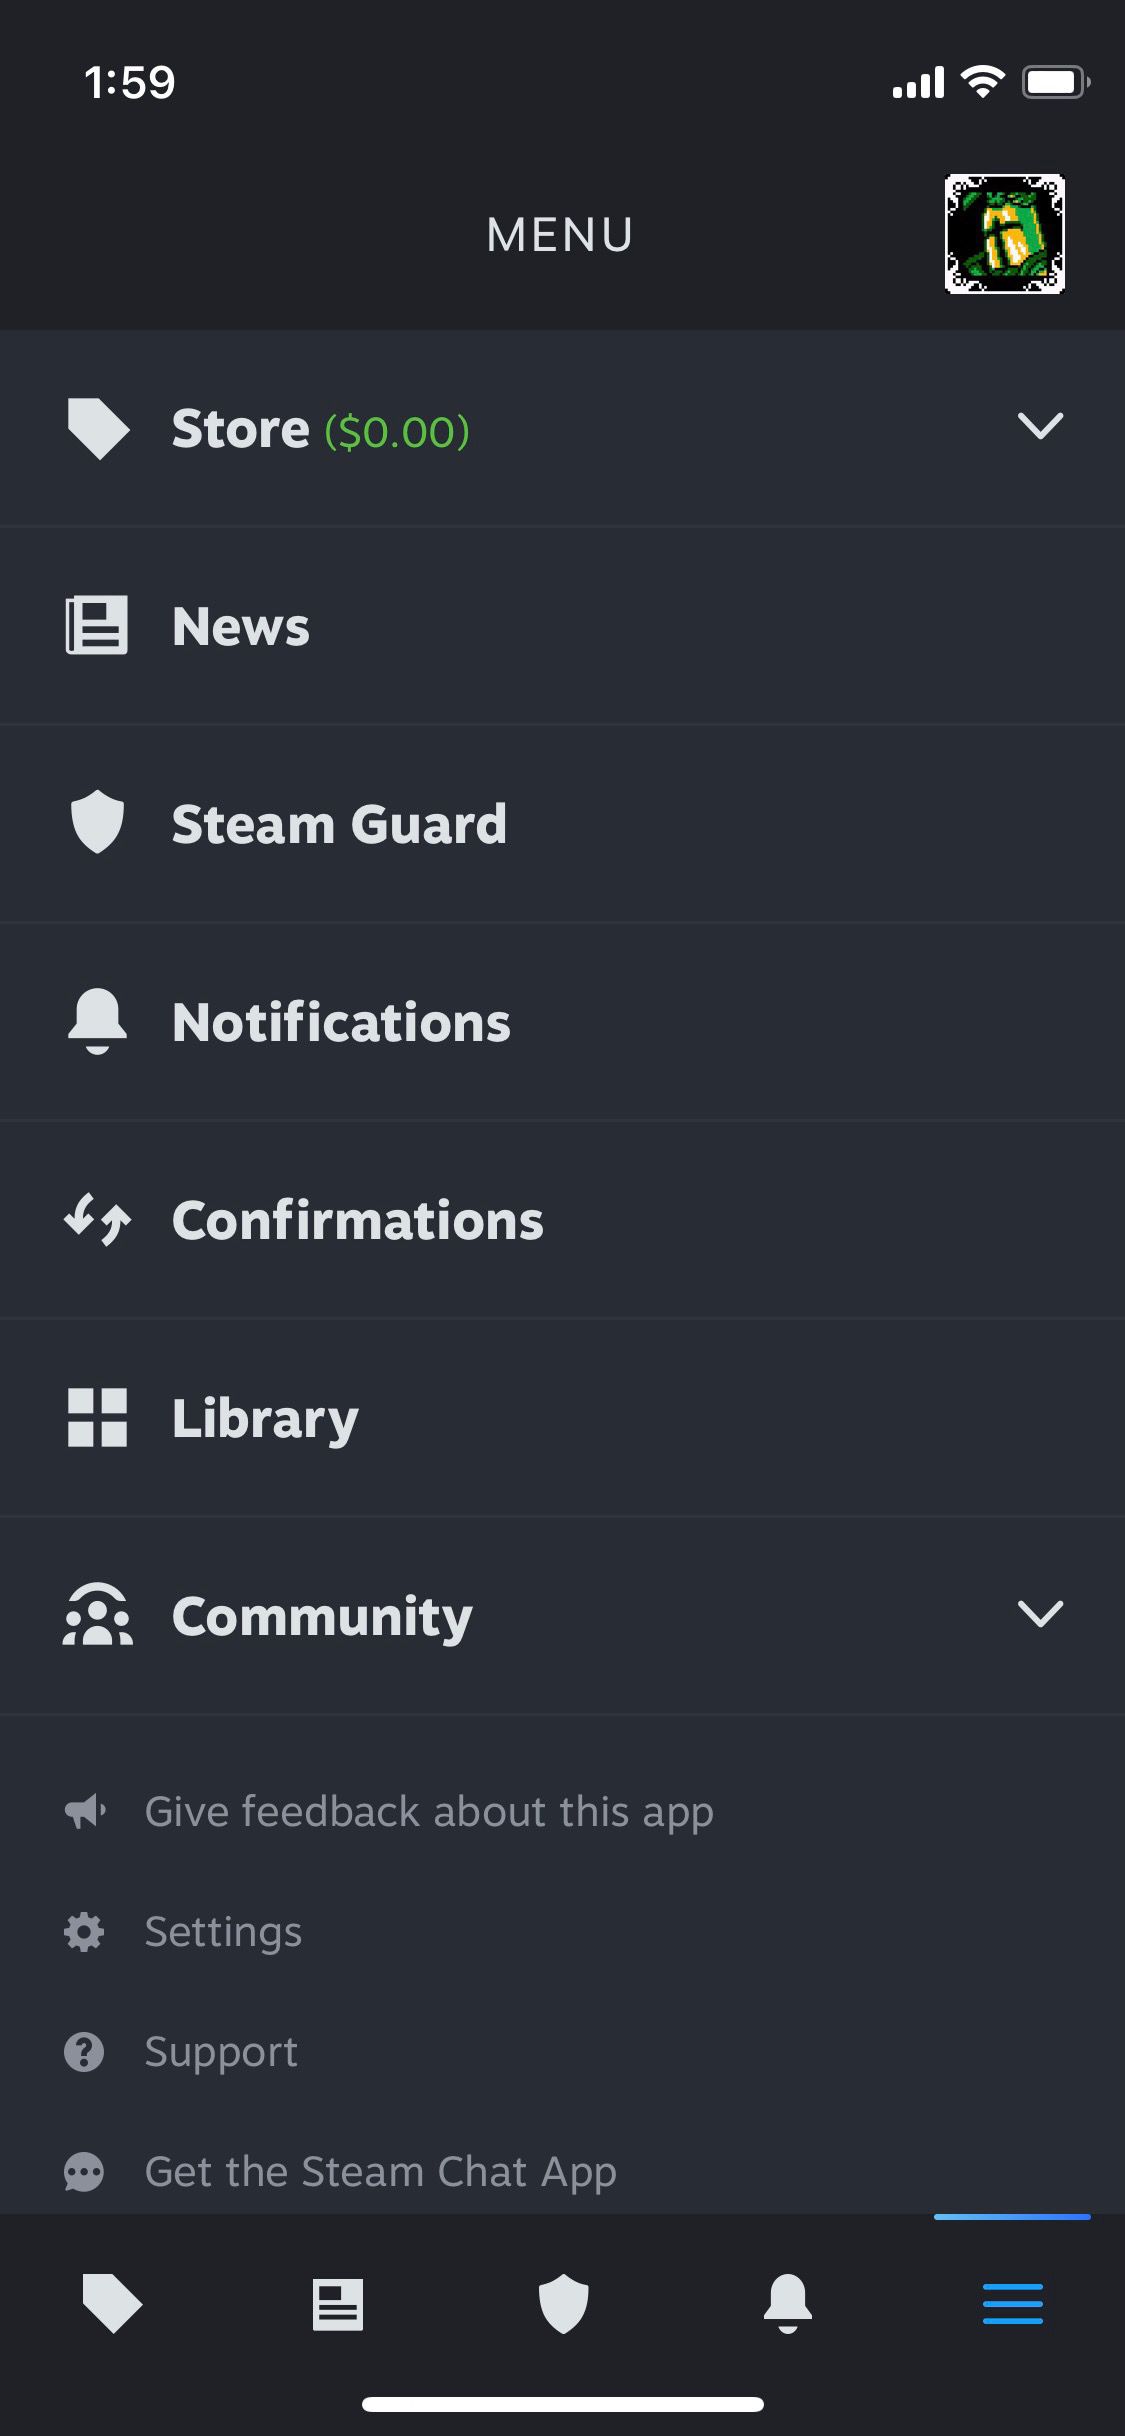 List of several sub-menus in the new Steam app.